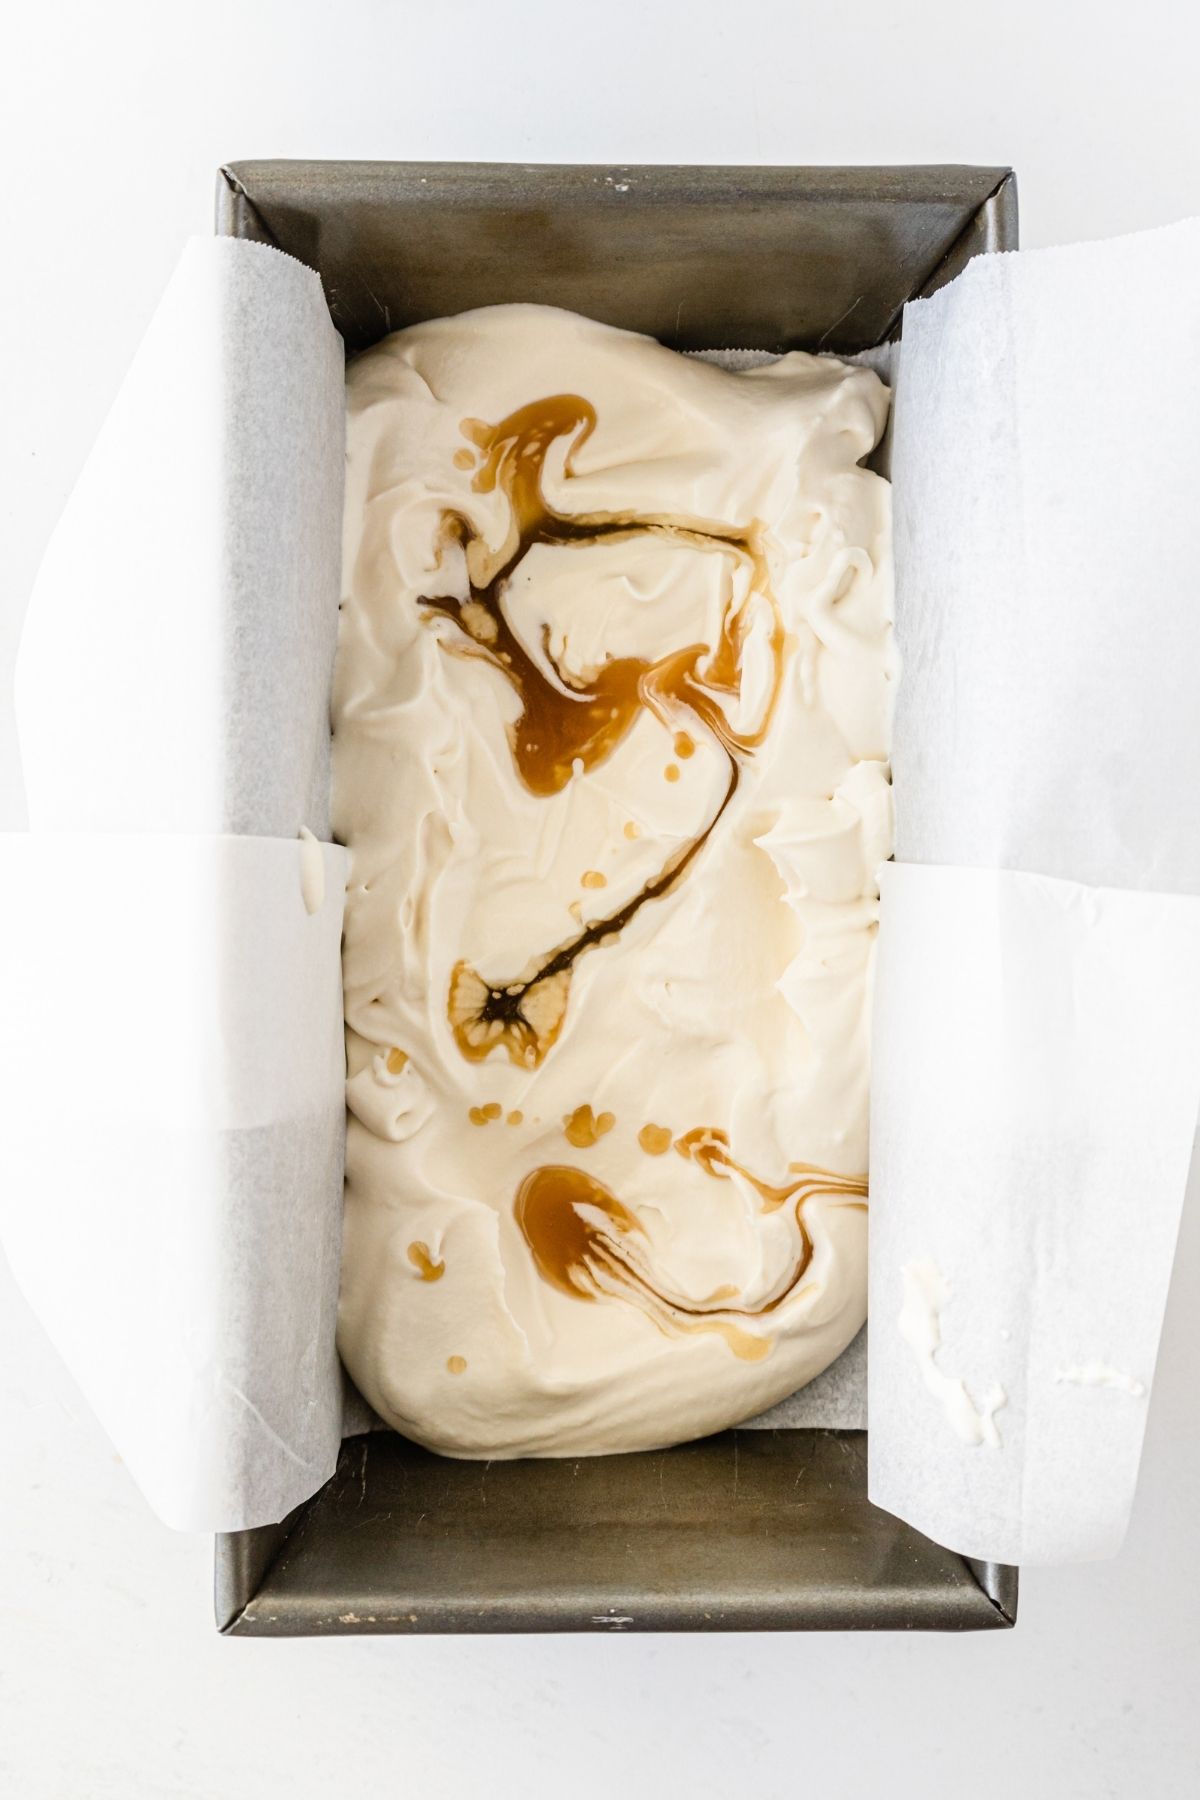 white ice cream with butterscotch drizzled on top in a loaf pan